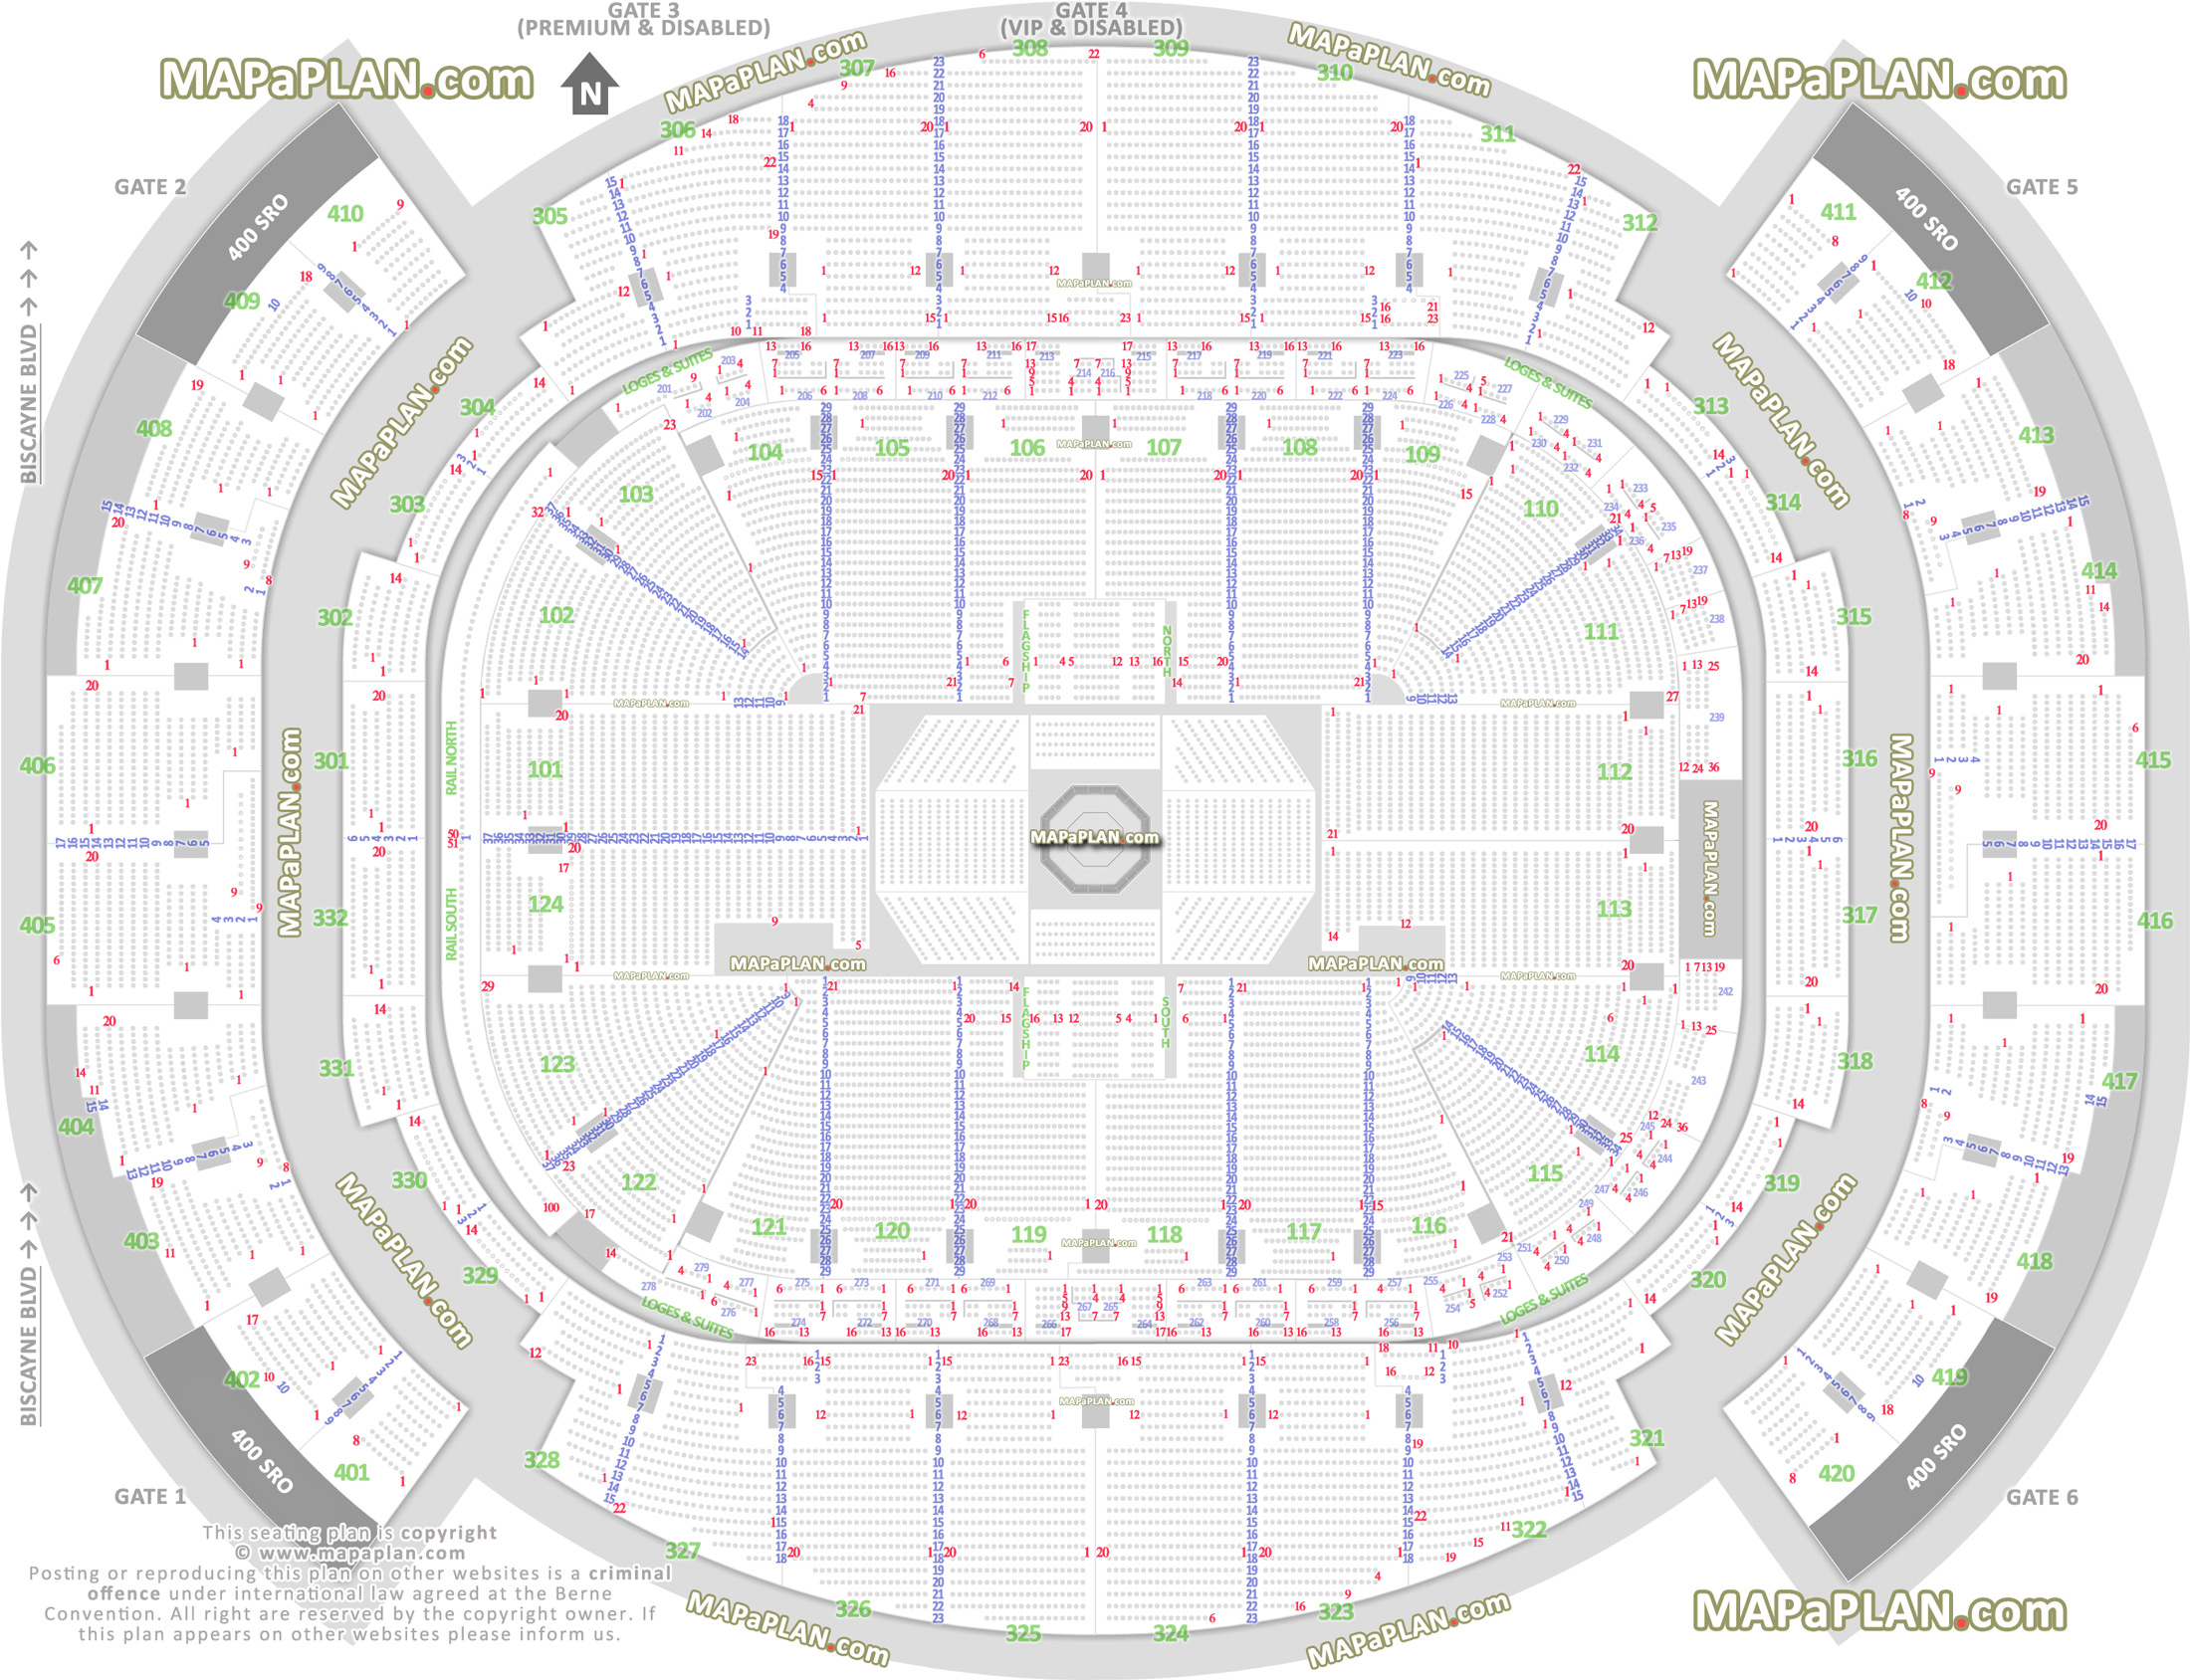 American Airlines Arena seat & row numbers detailed seating ...